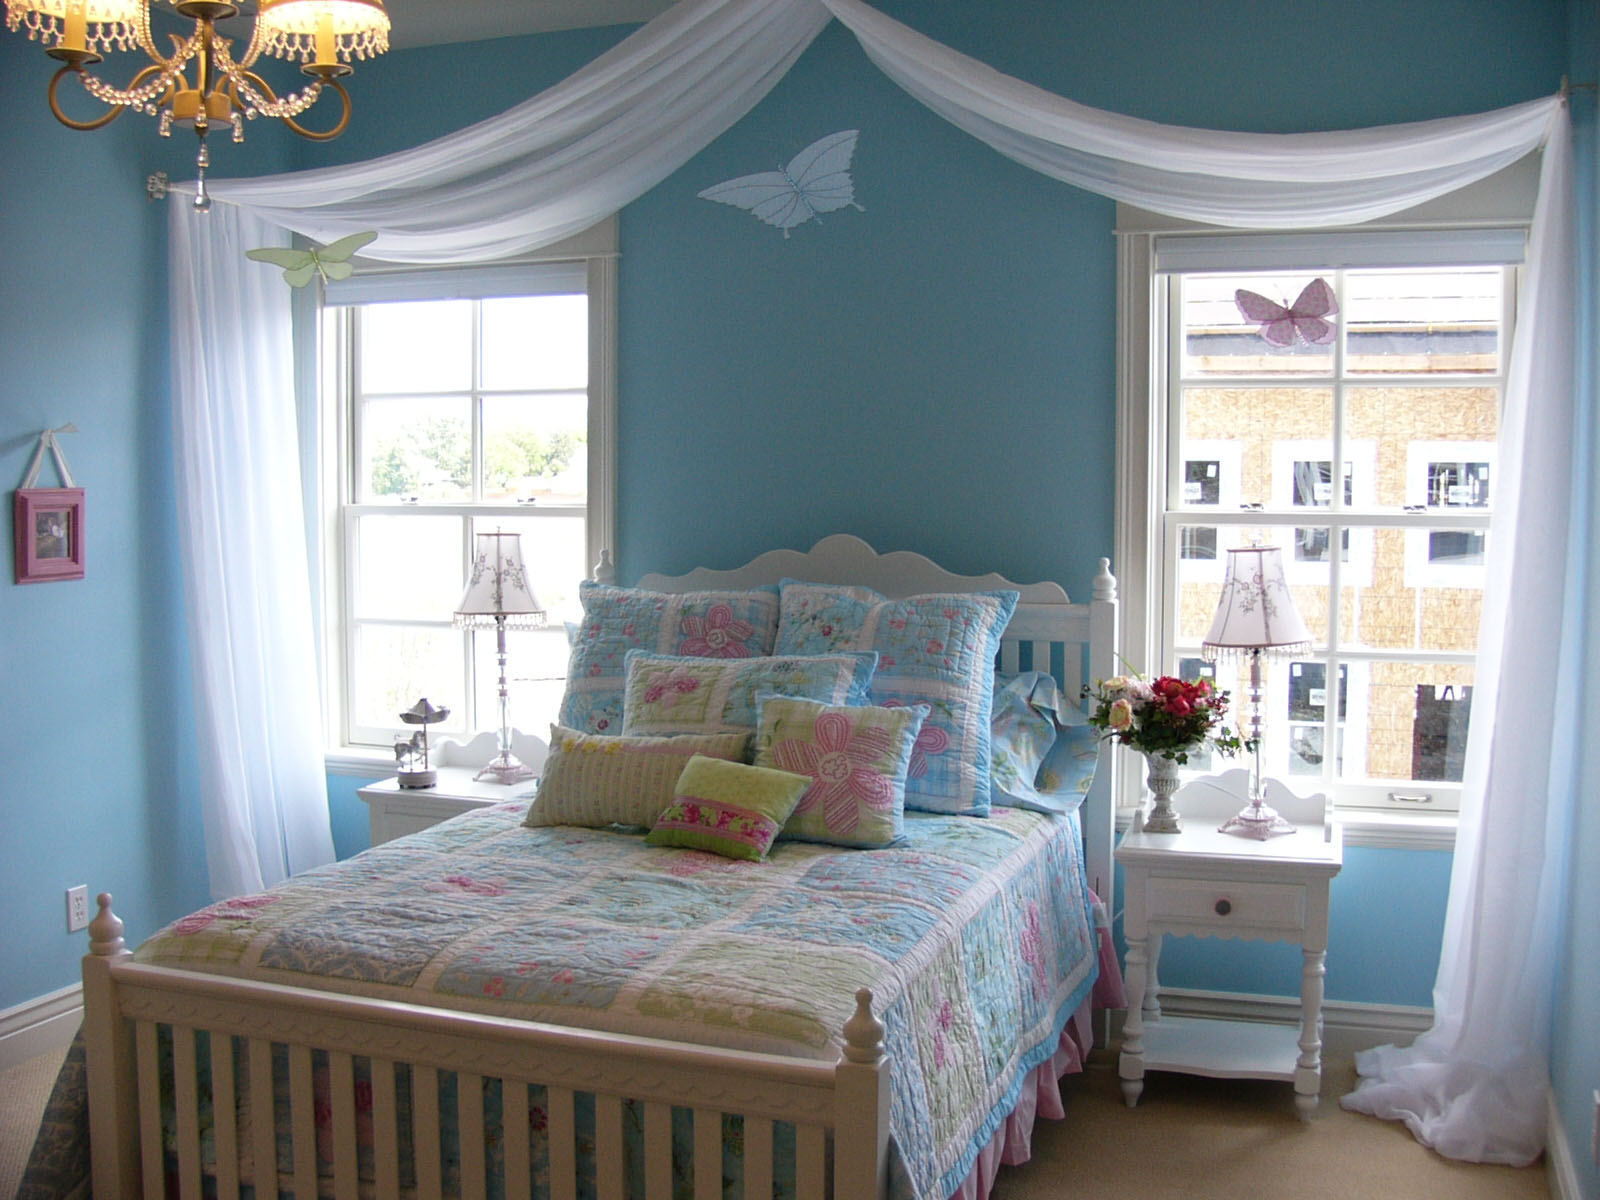 Blue Accent For Appealing Blue Accent Wall Color For Girls Bedroom Ideas Combined With White Room Curtains Furnished With Bed Between Twin Nightstands And Completed By Night Lamps Bedroom Girls Bedroom Ideas: The Orchid Touch